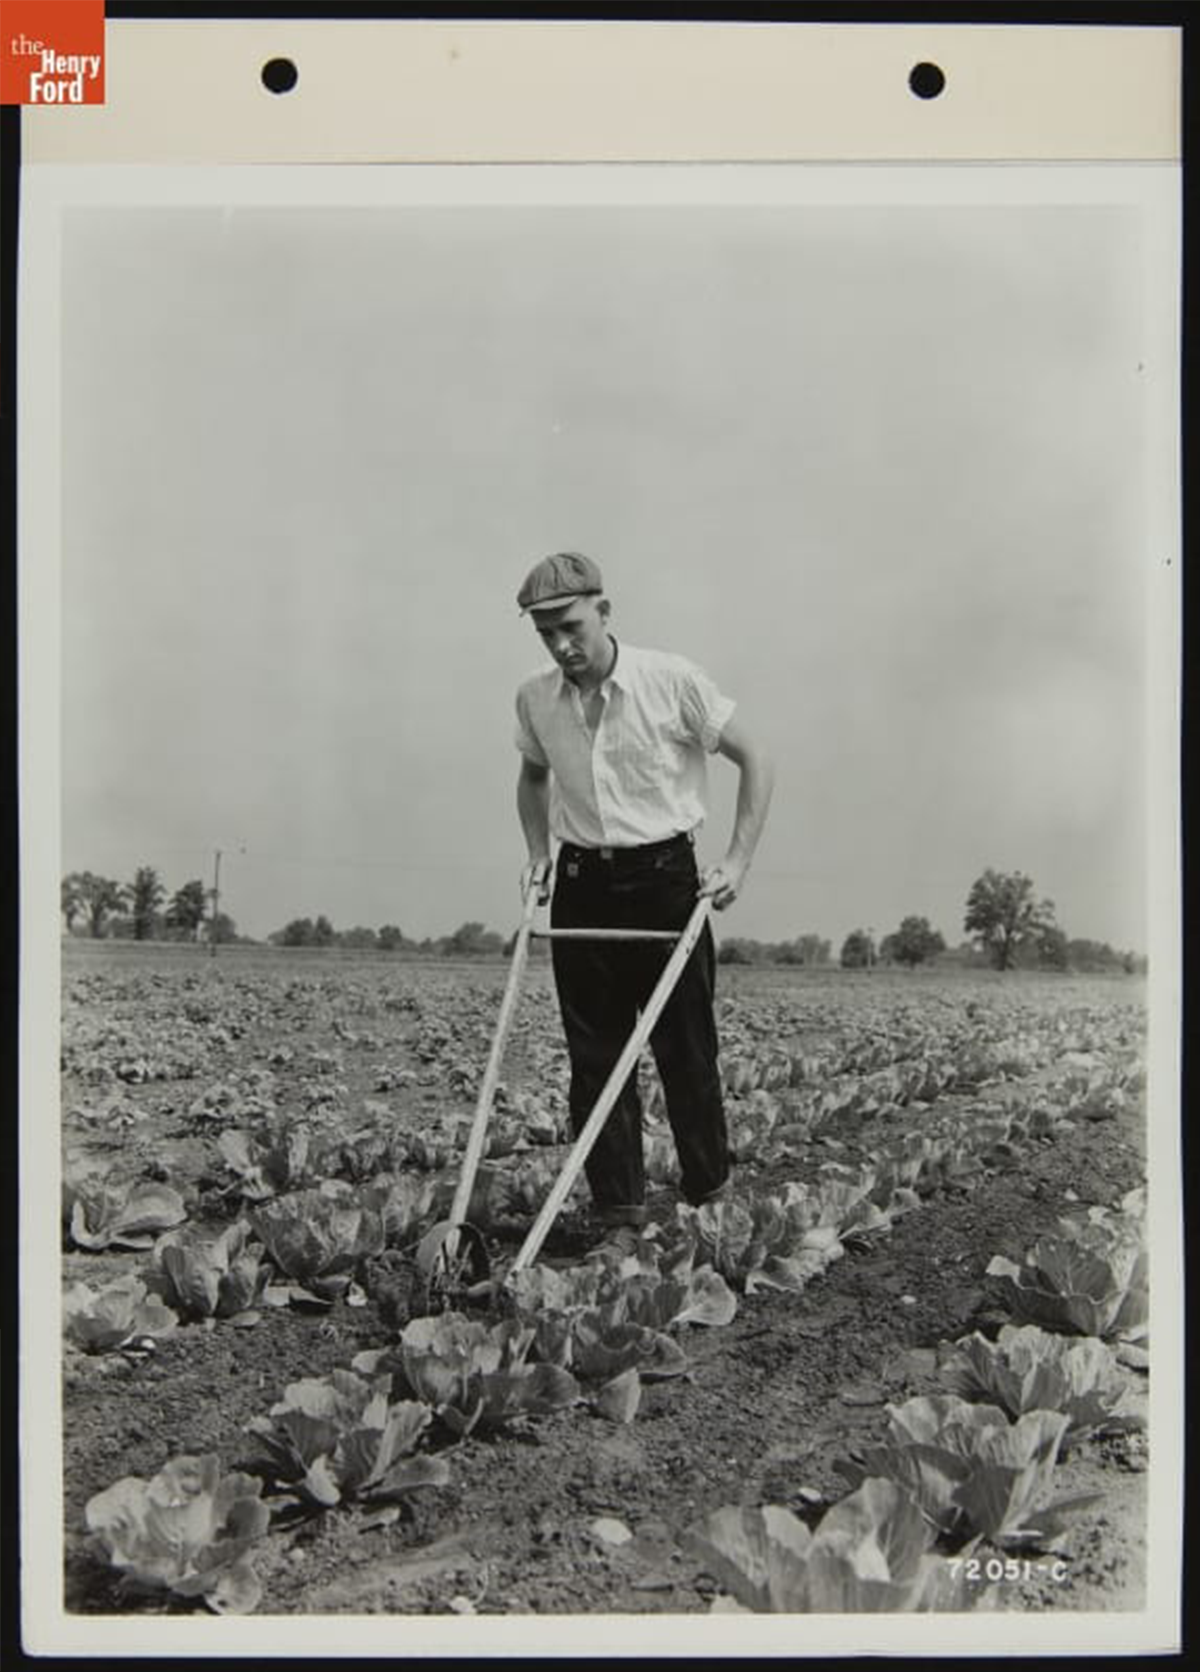 Weeding cabbages with a walking cultivator, Camp Willow Run working farm, Ypsilanti, Michigan, July 1939